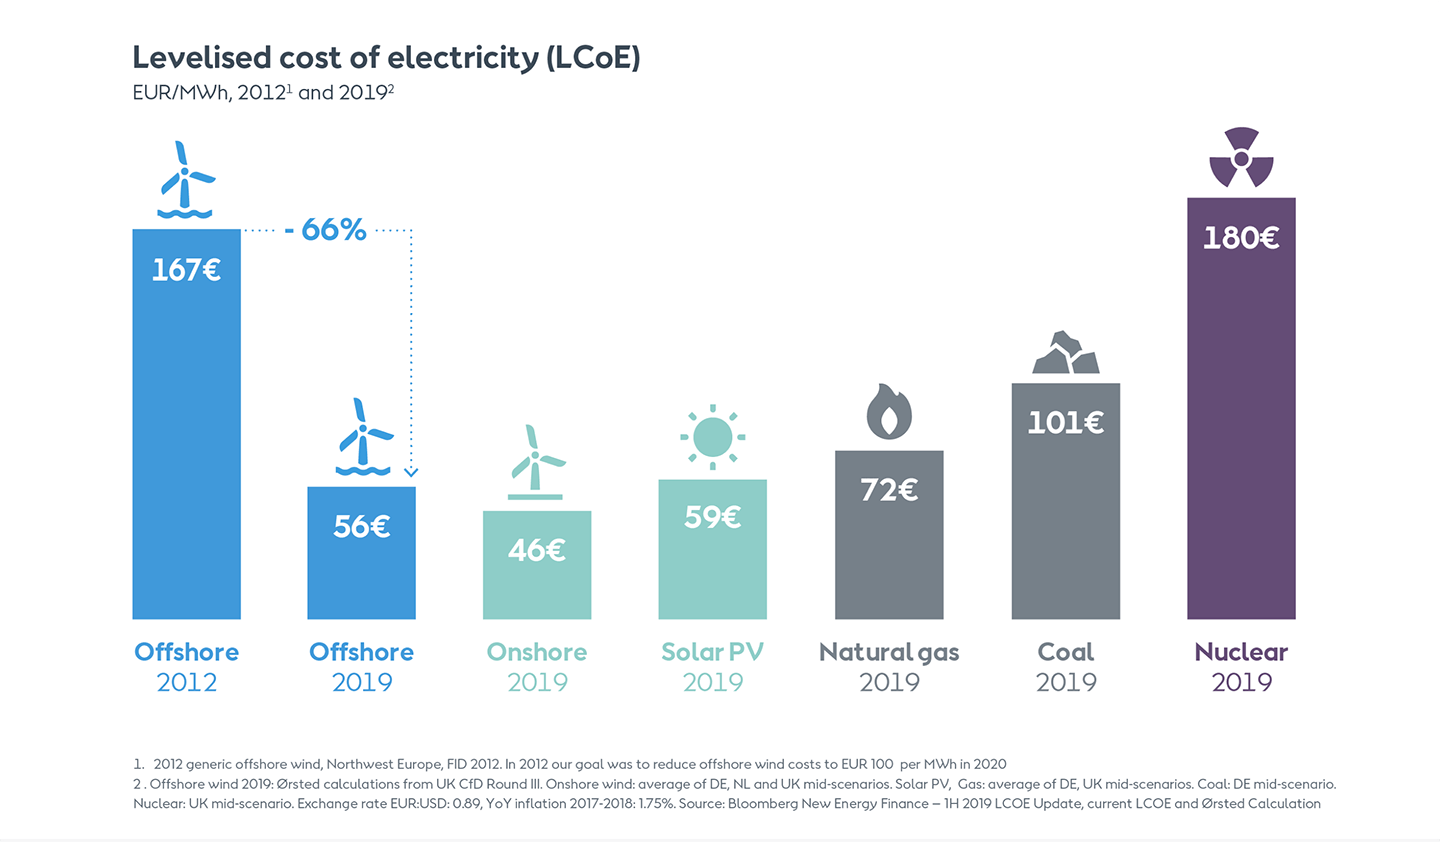 A graph showing the levelized cost of energy (LCoE) of various clean energies in 2019, with offshore wind falling by 66%.